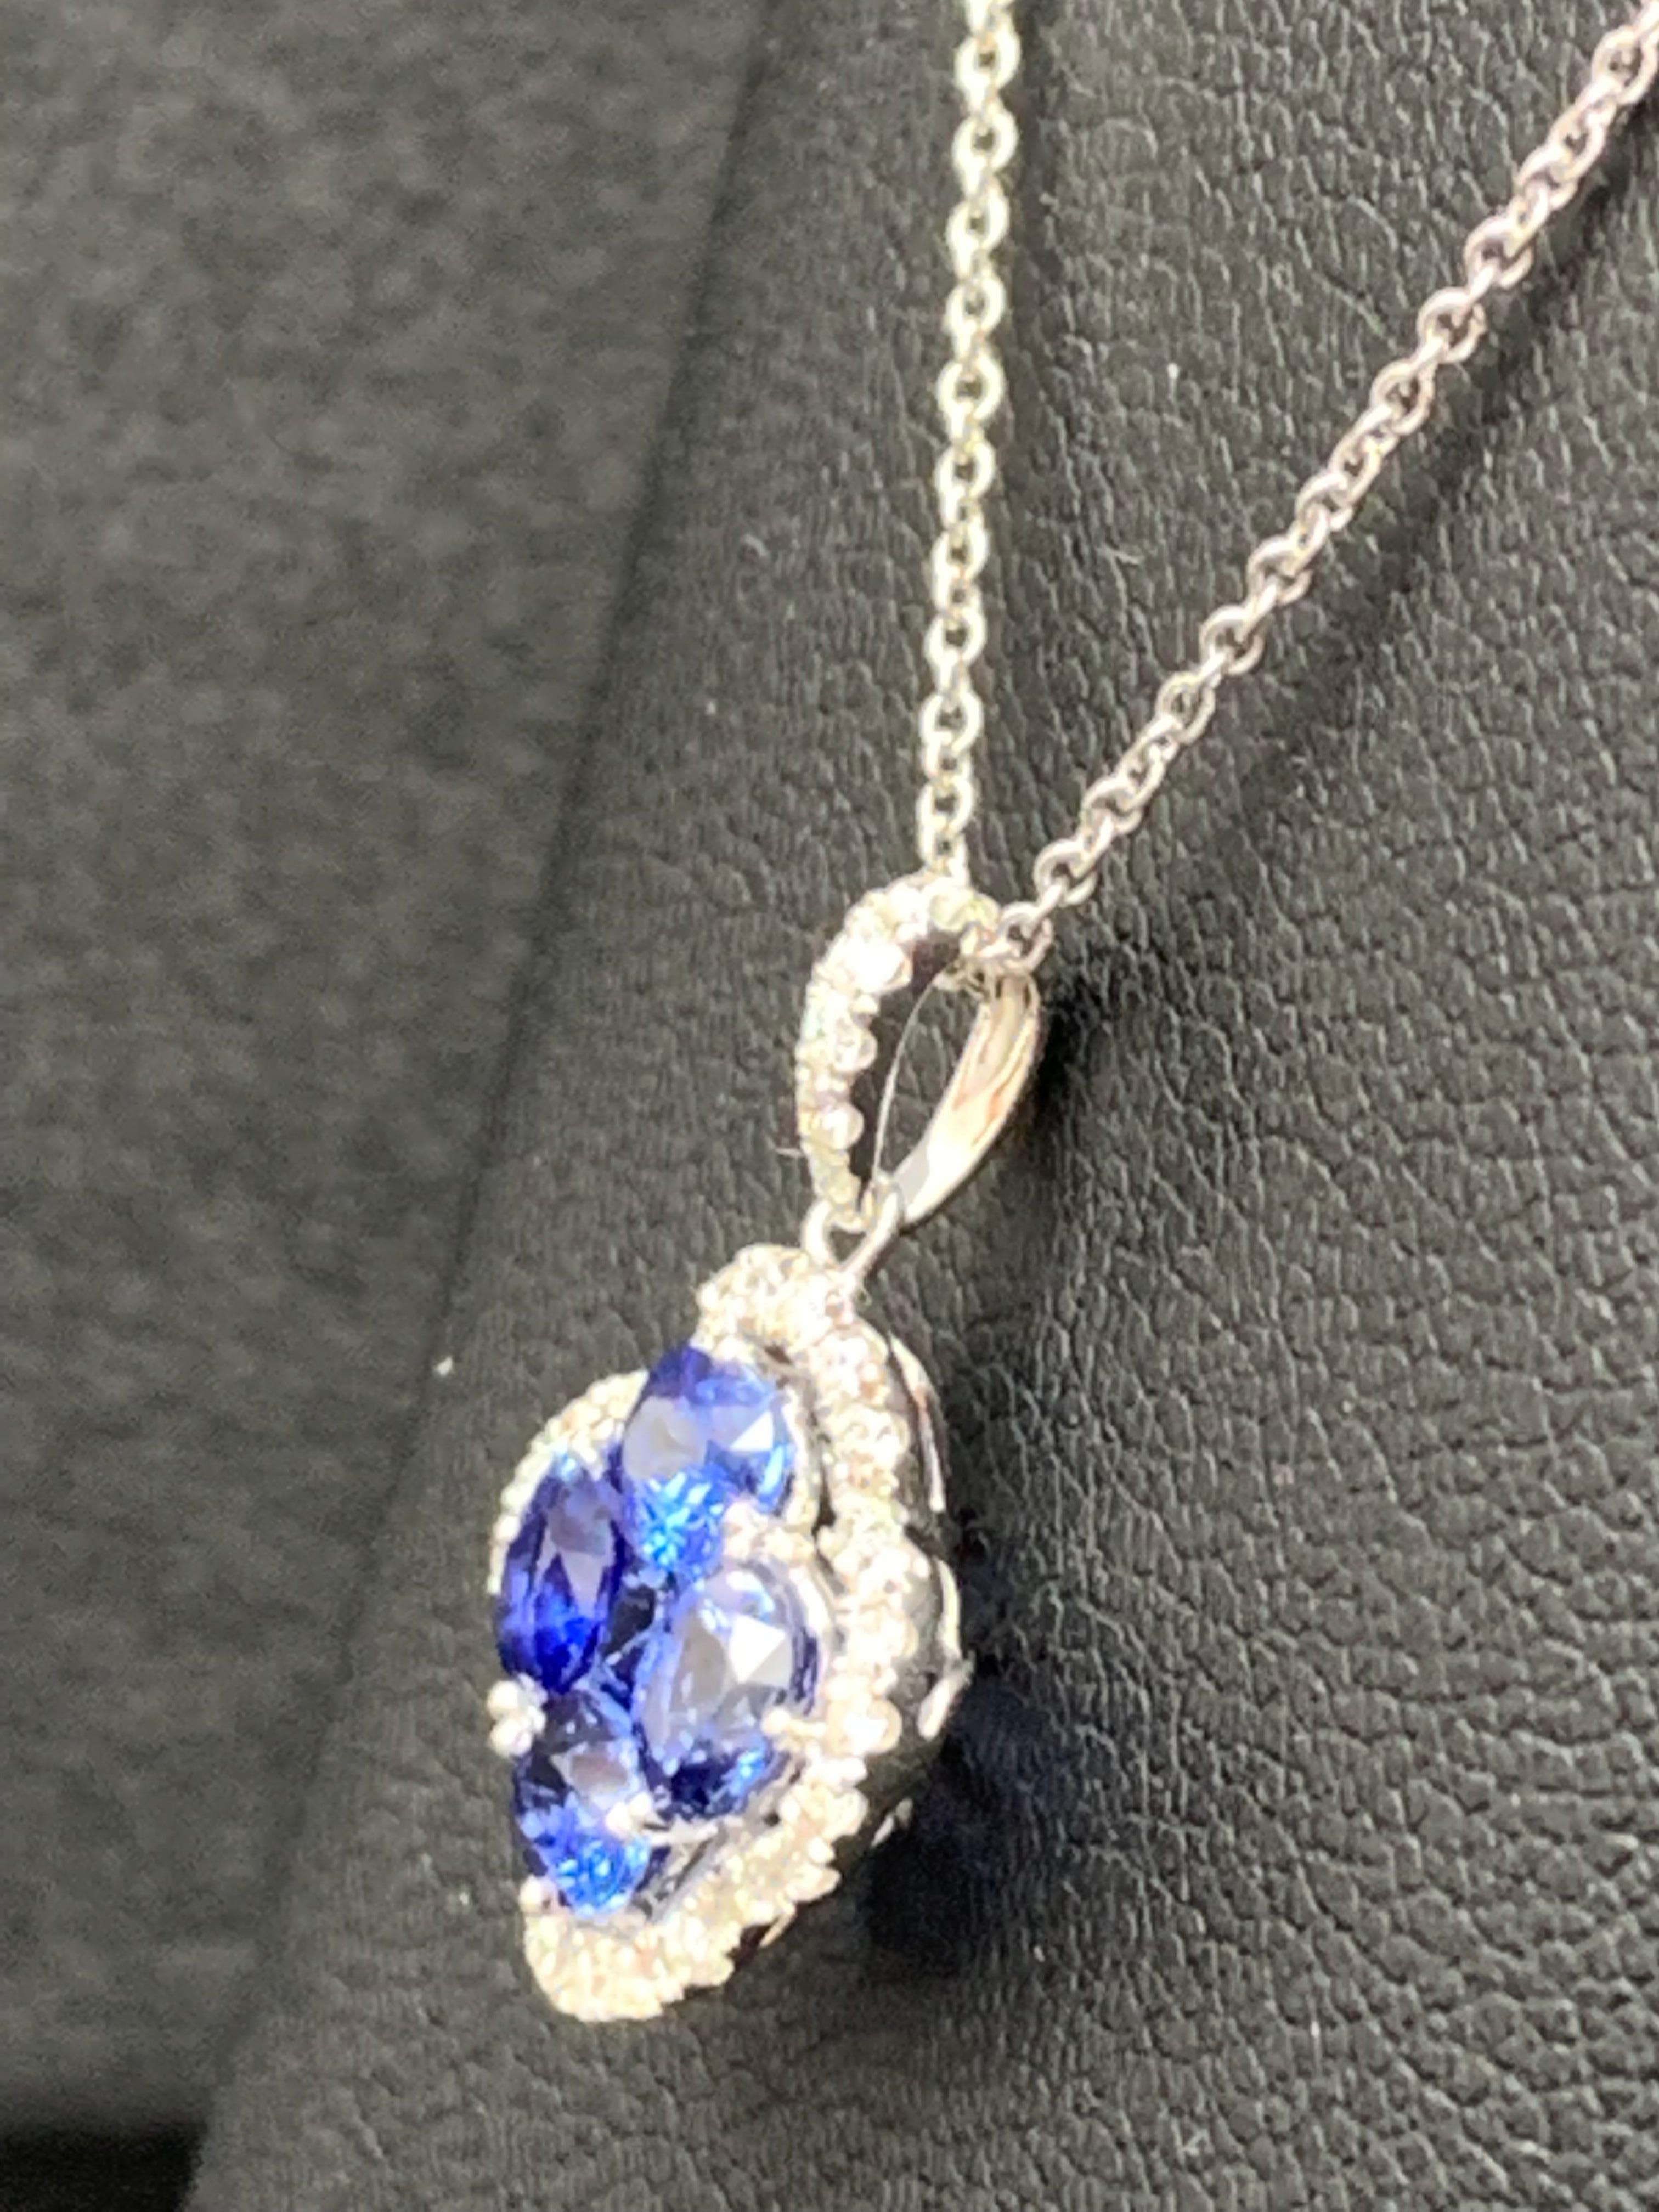 Showcasing flower design pendant with 4 oval shape Blue Sapphires weighing 1.33 carats total and 1 round shape Blue Sapphire weighing 0.13 carat, accented by a row of 33 round brilliant diamonds. Diamonds weigh 0.25 carats total. Set in a polished